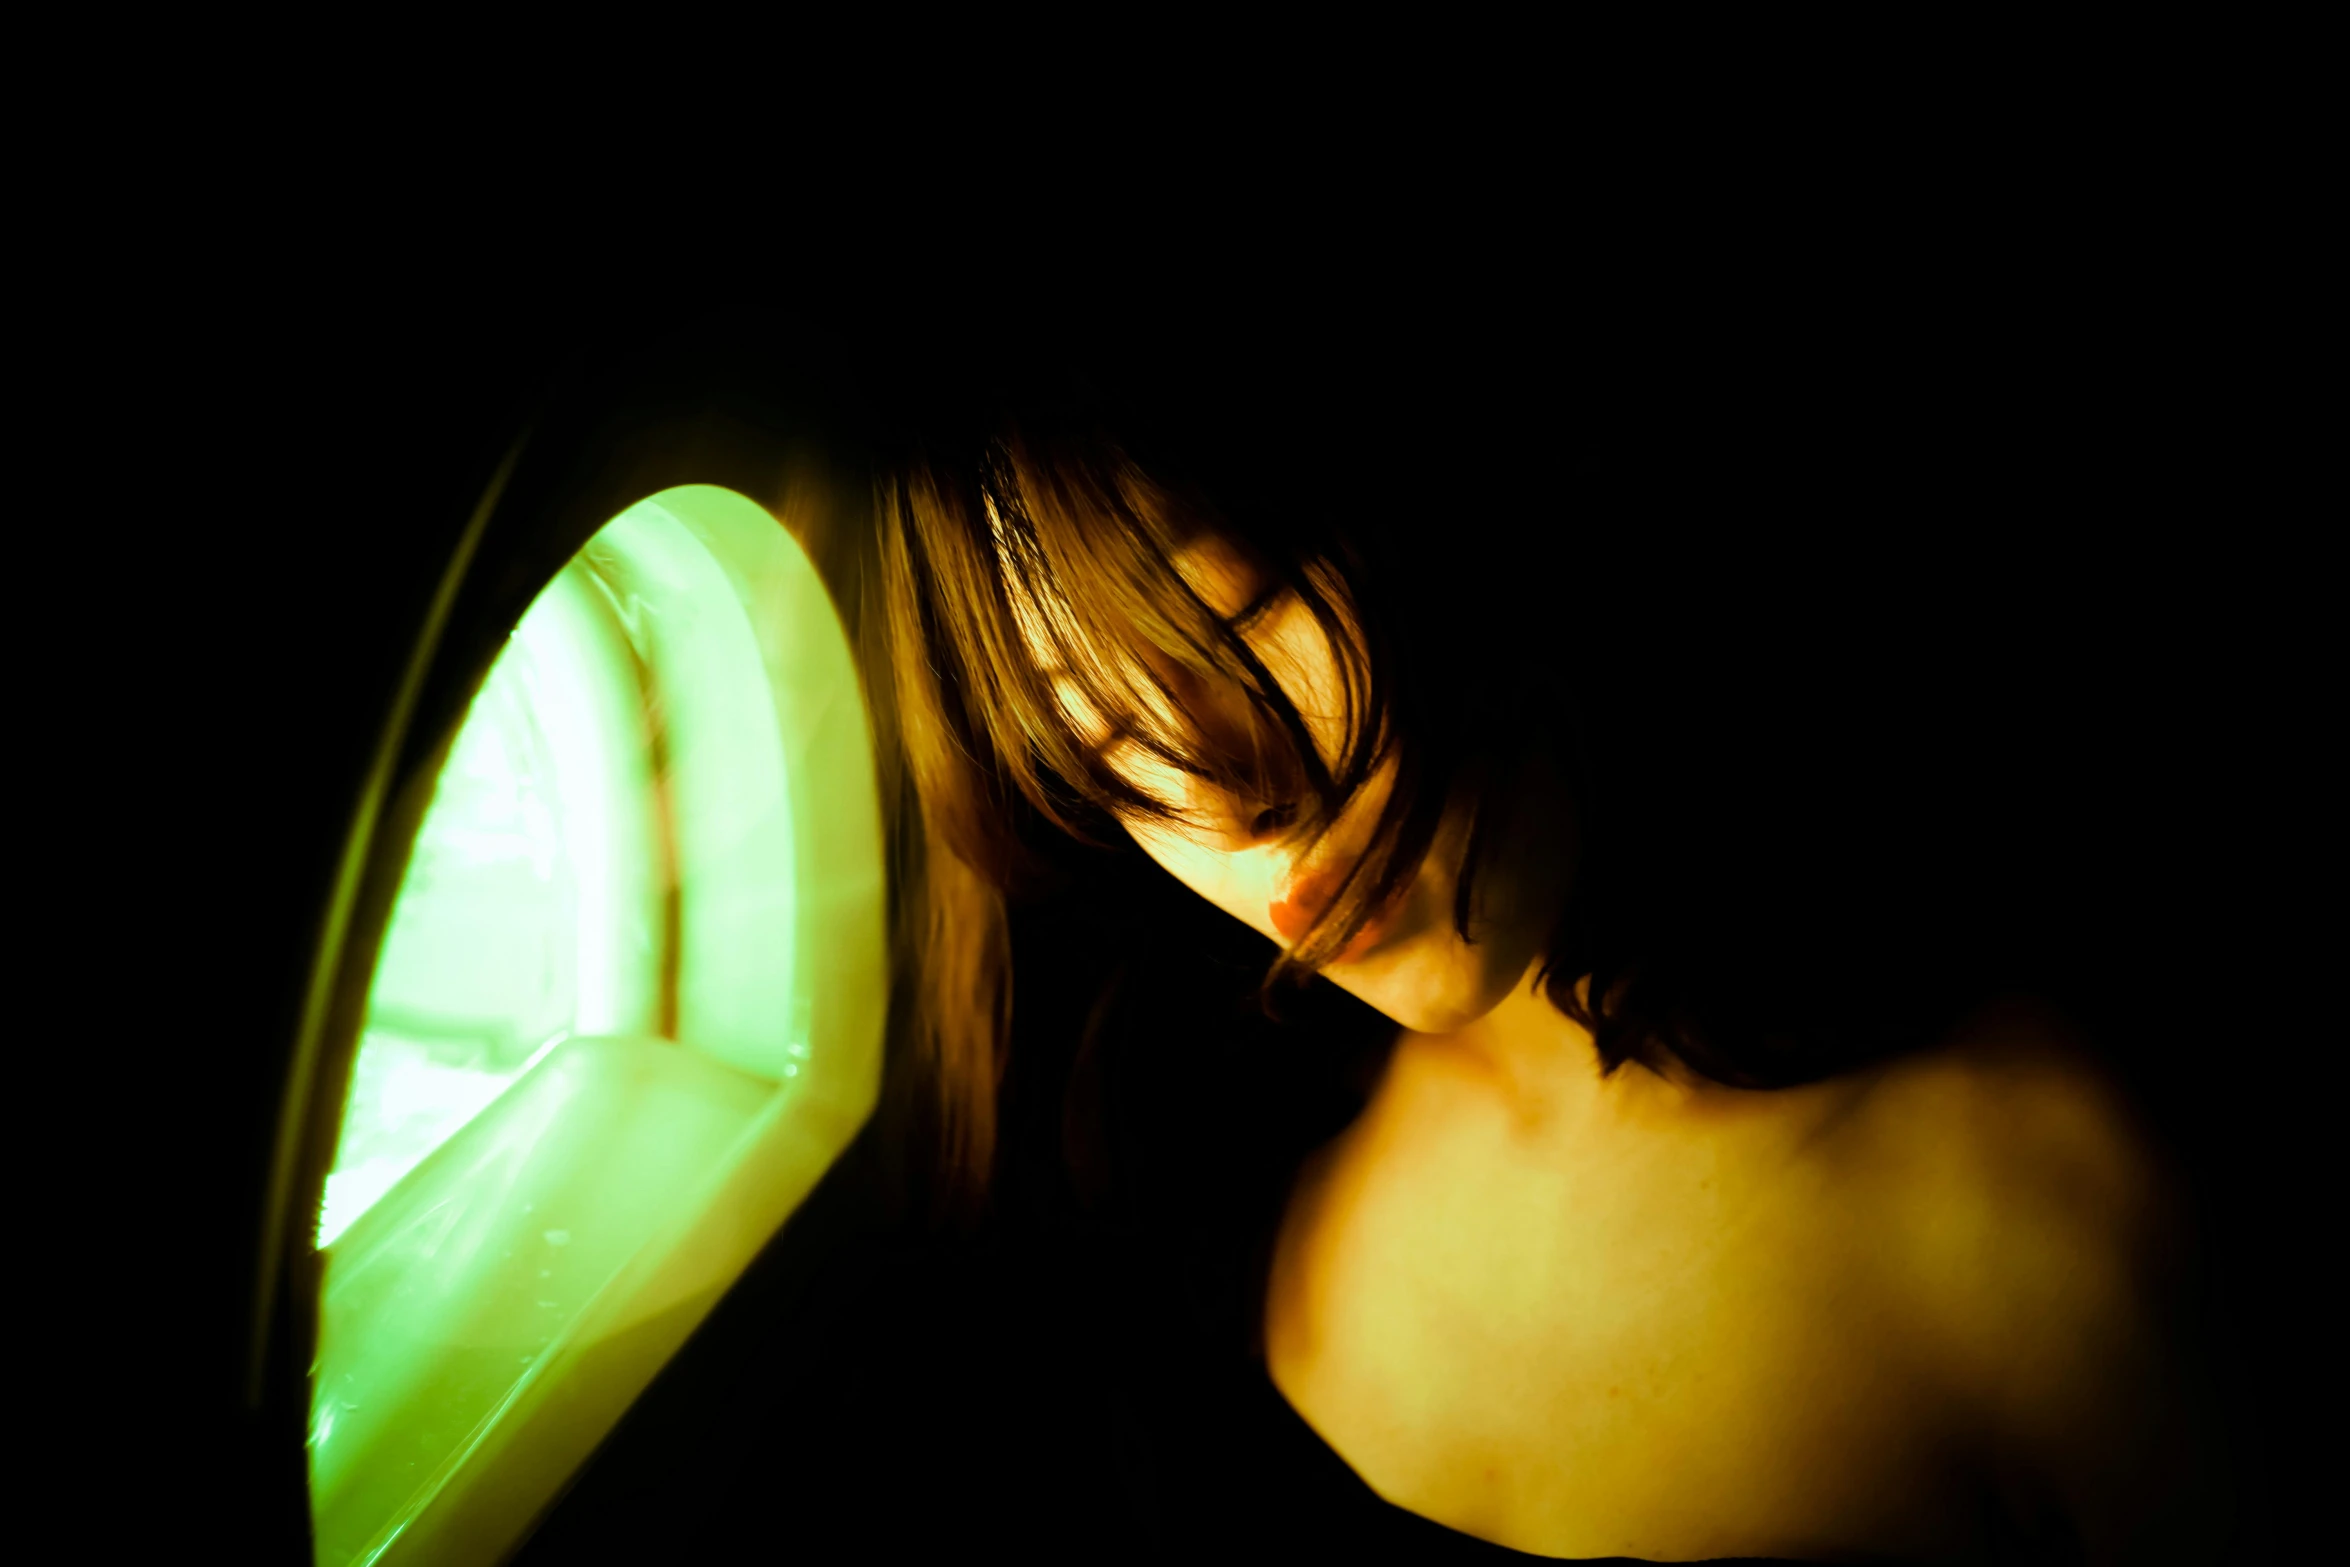 a woman holding onto an illuminated green object